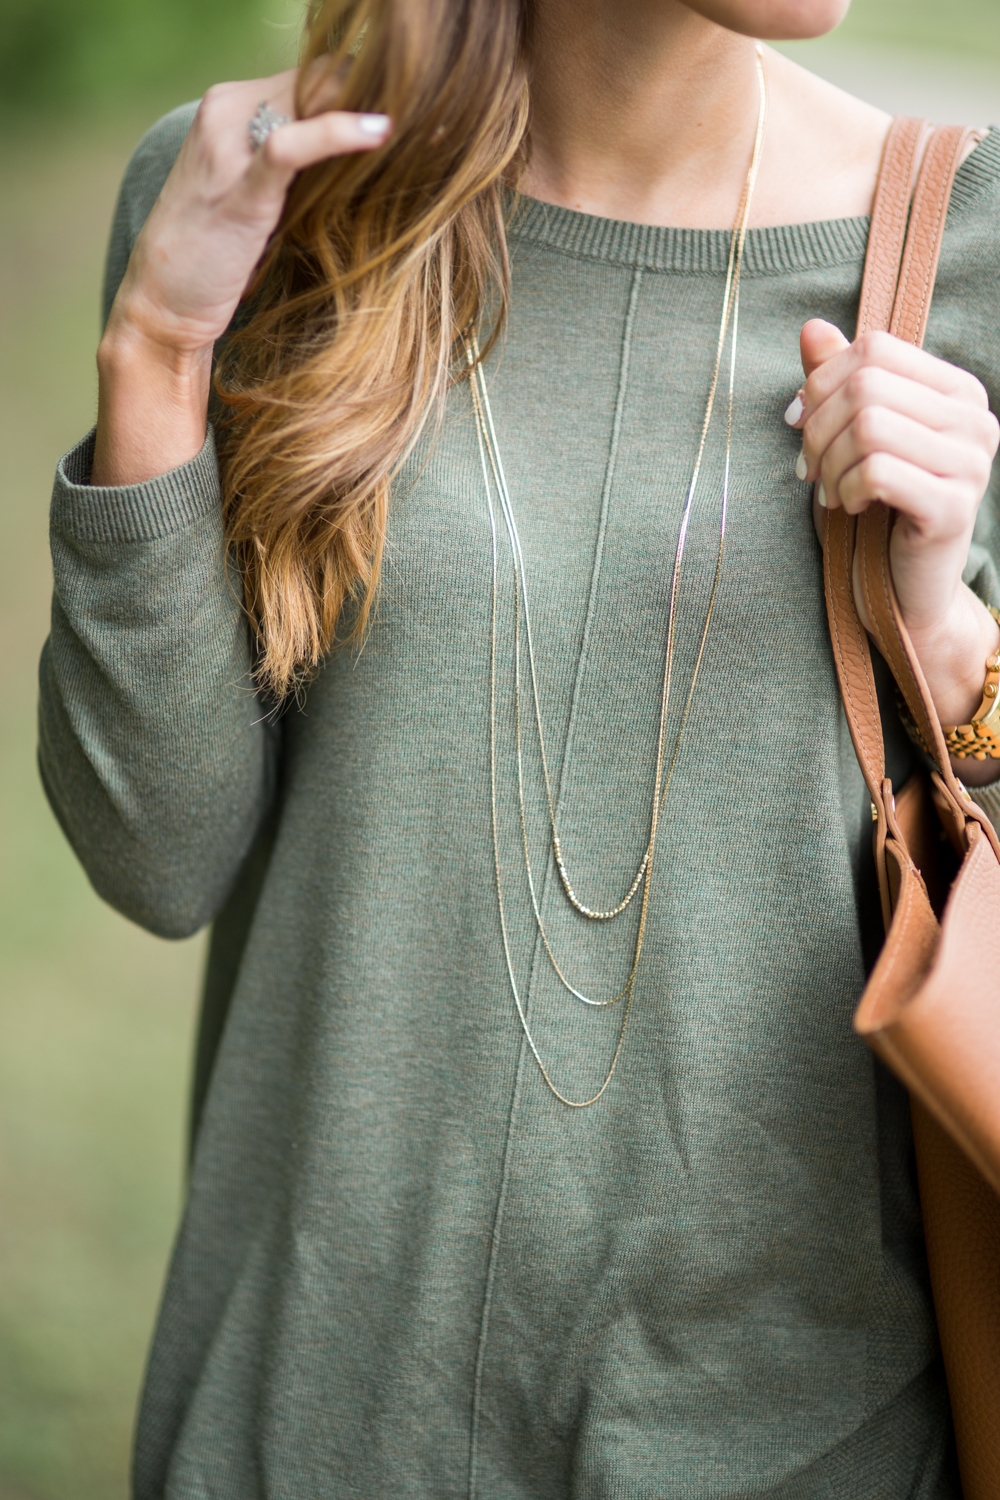 olive green topshop sweater with delicate gold layered nekclaces